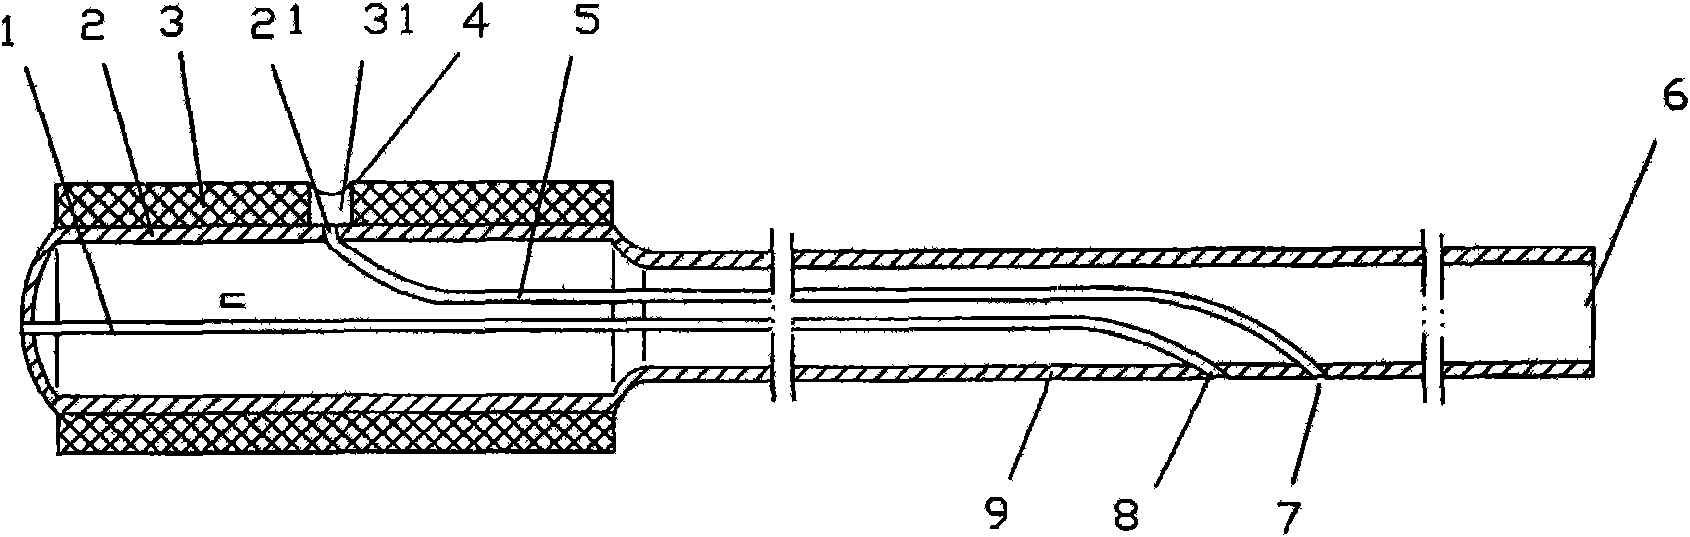 Balloon expandable stent with side-hole channel